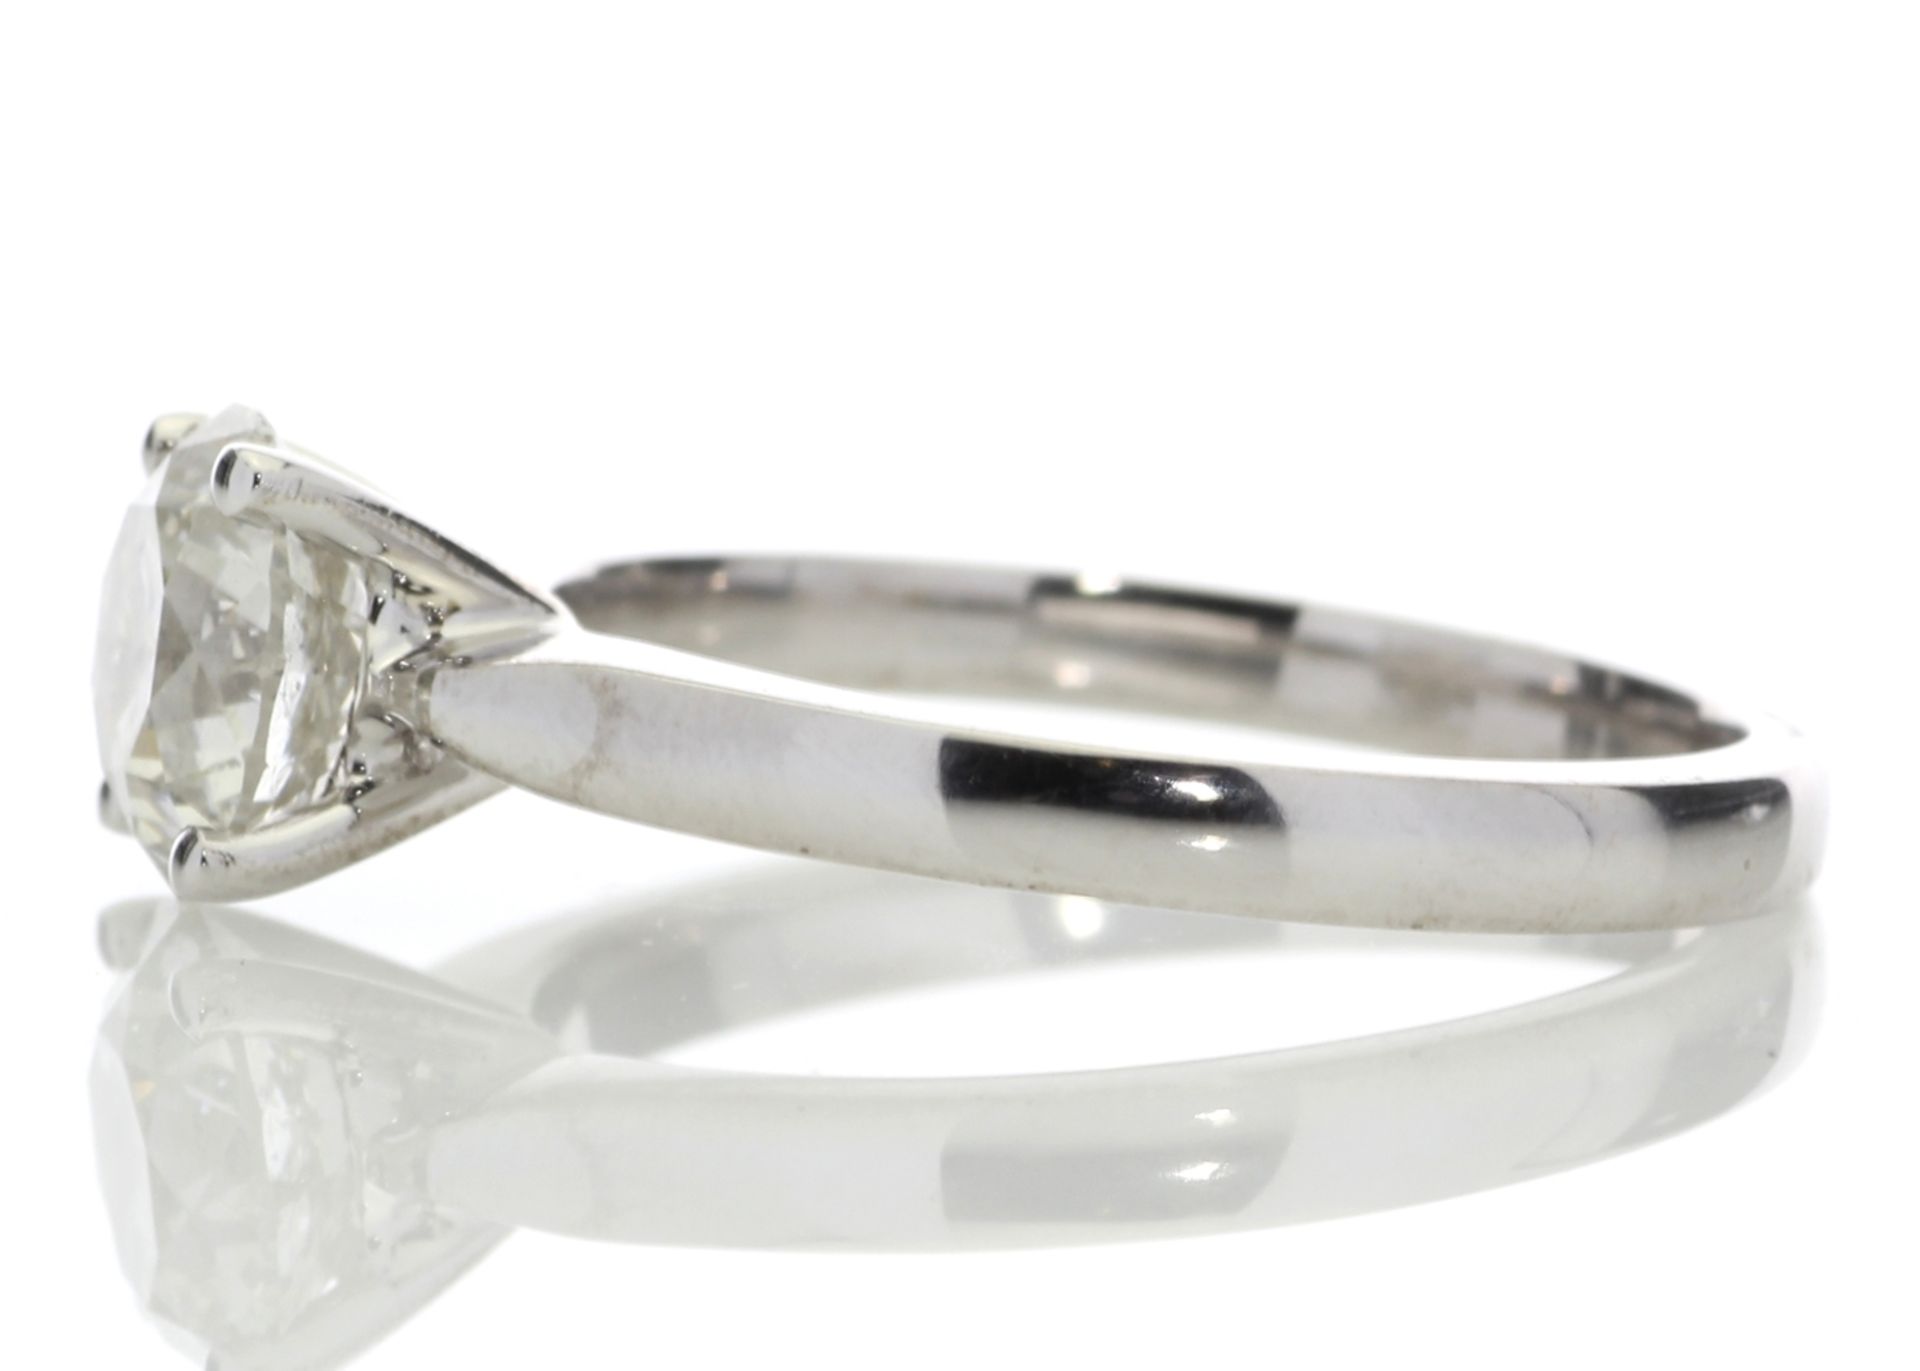 18ct White Gold Claw Set Diamond Ring 1.24 Carats - Valued By GIE £28,115.00 - A beautiful and - Image 3 of 5